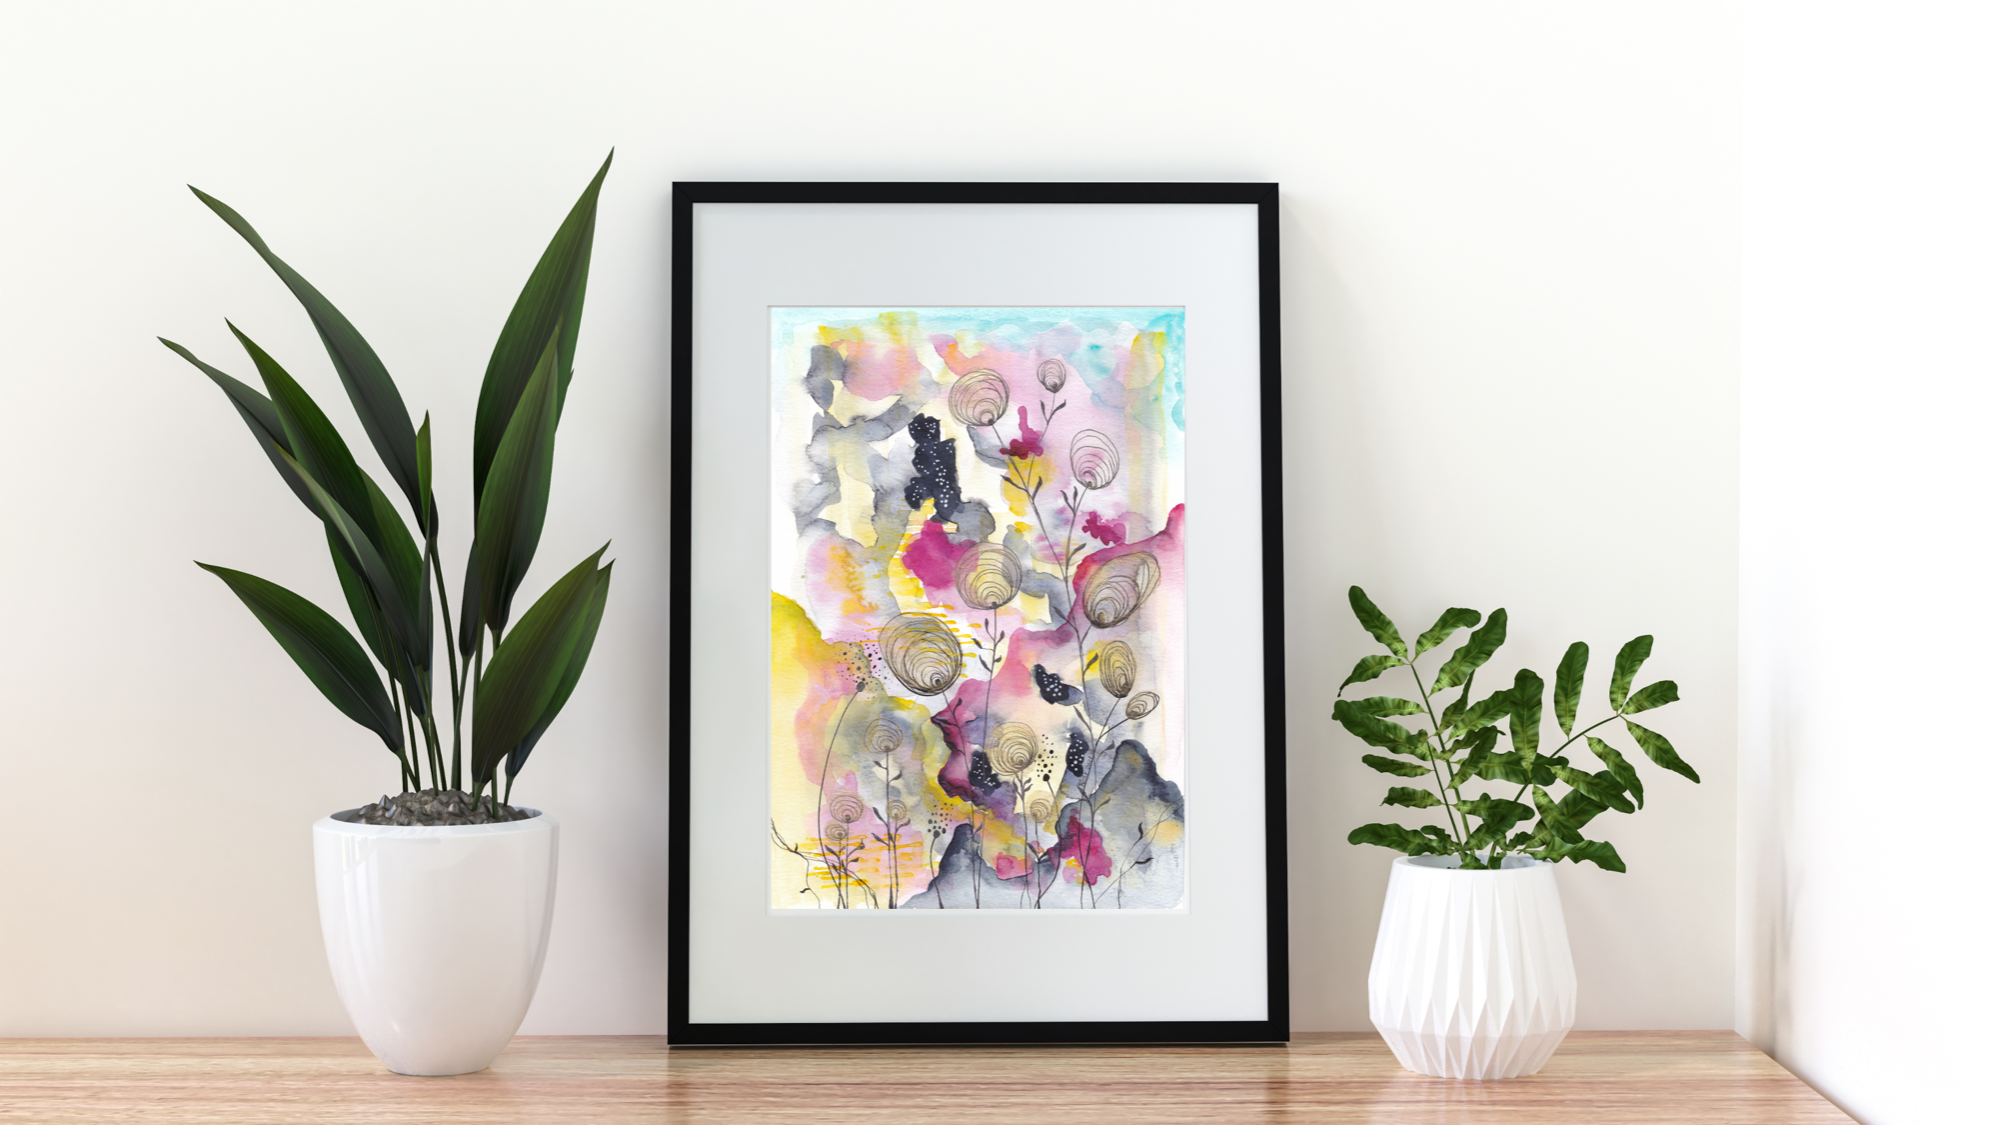 Enchanted Garden Original Watercolour Painting by Stacey-Ann Cole